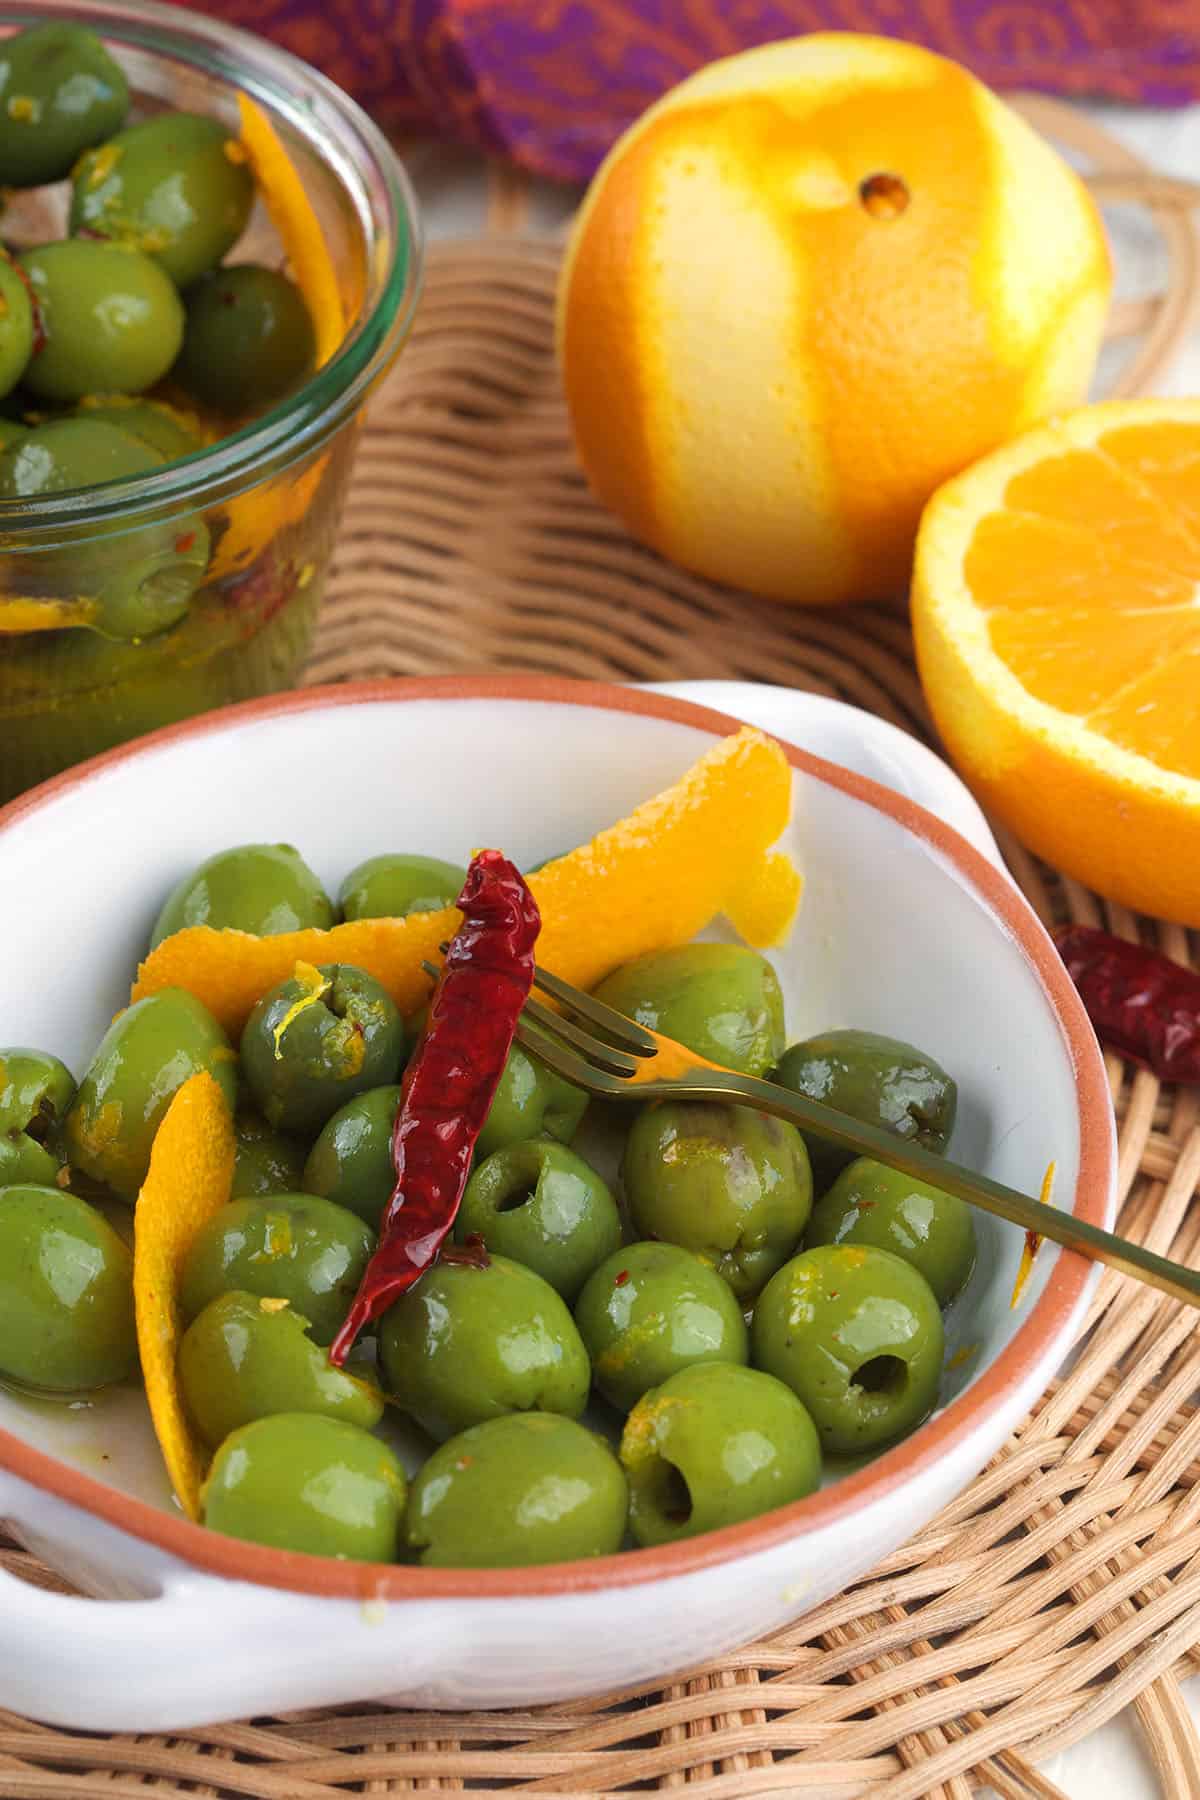 Orange peels and chili peppers are placed in a bowl of olives. 